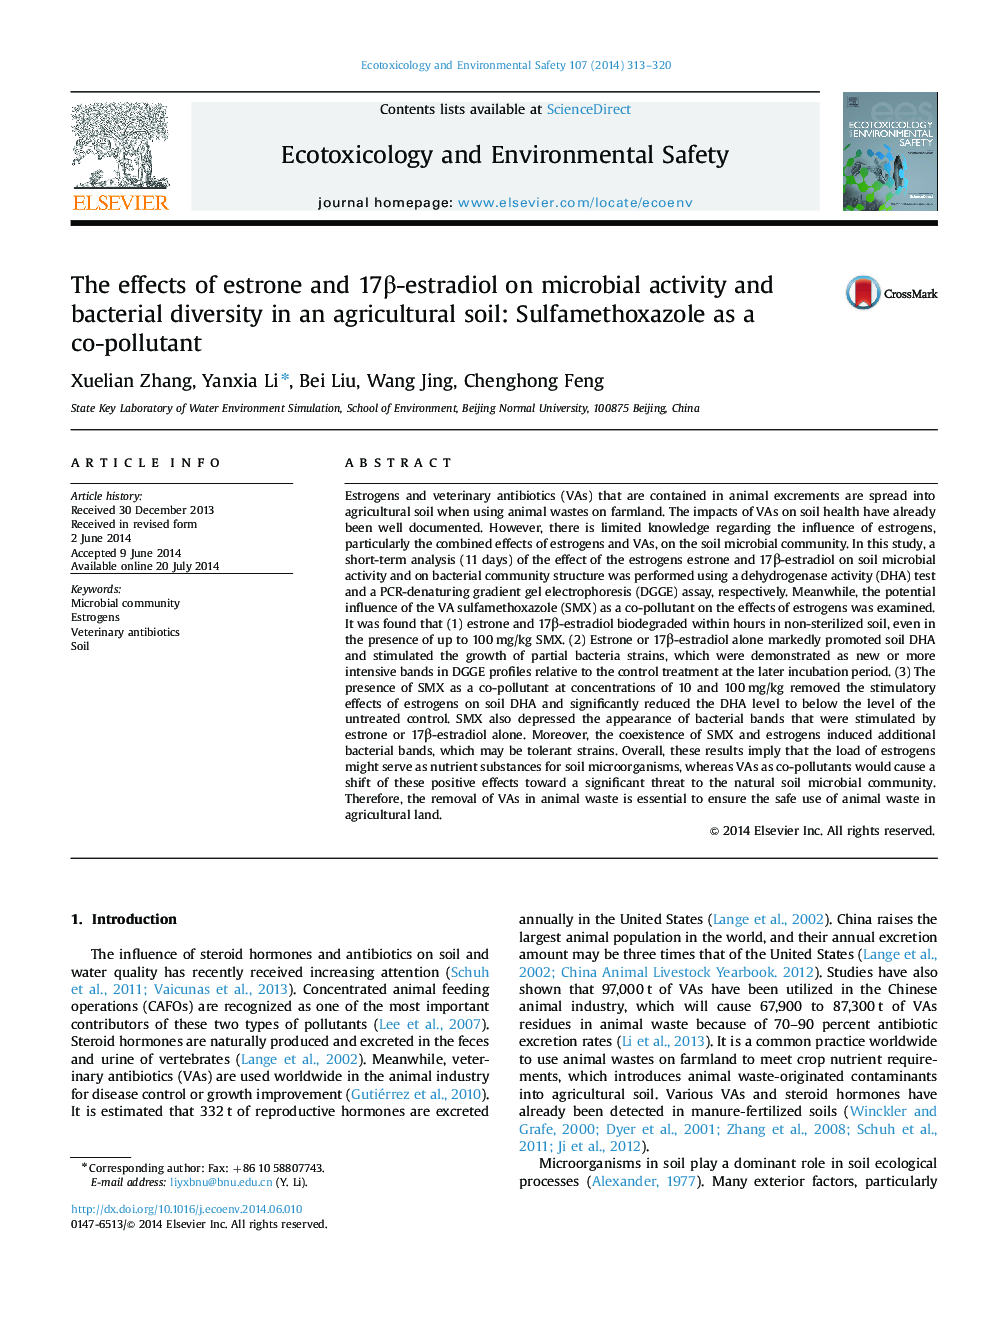 The effects of estrone and 17β-estradiol on microbial activity and bacterial diversity in an agricultural soil: Sulfamethoxazole as a co-pollutant